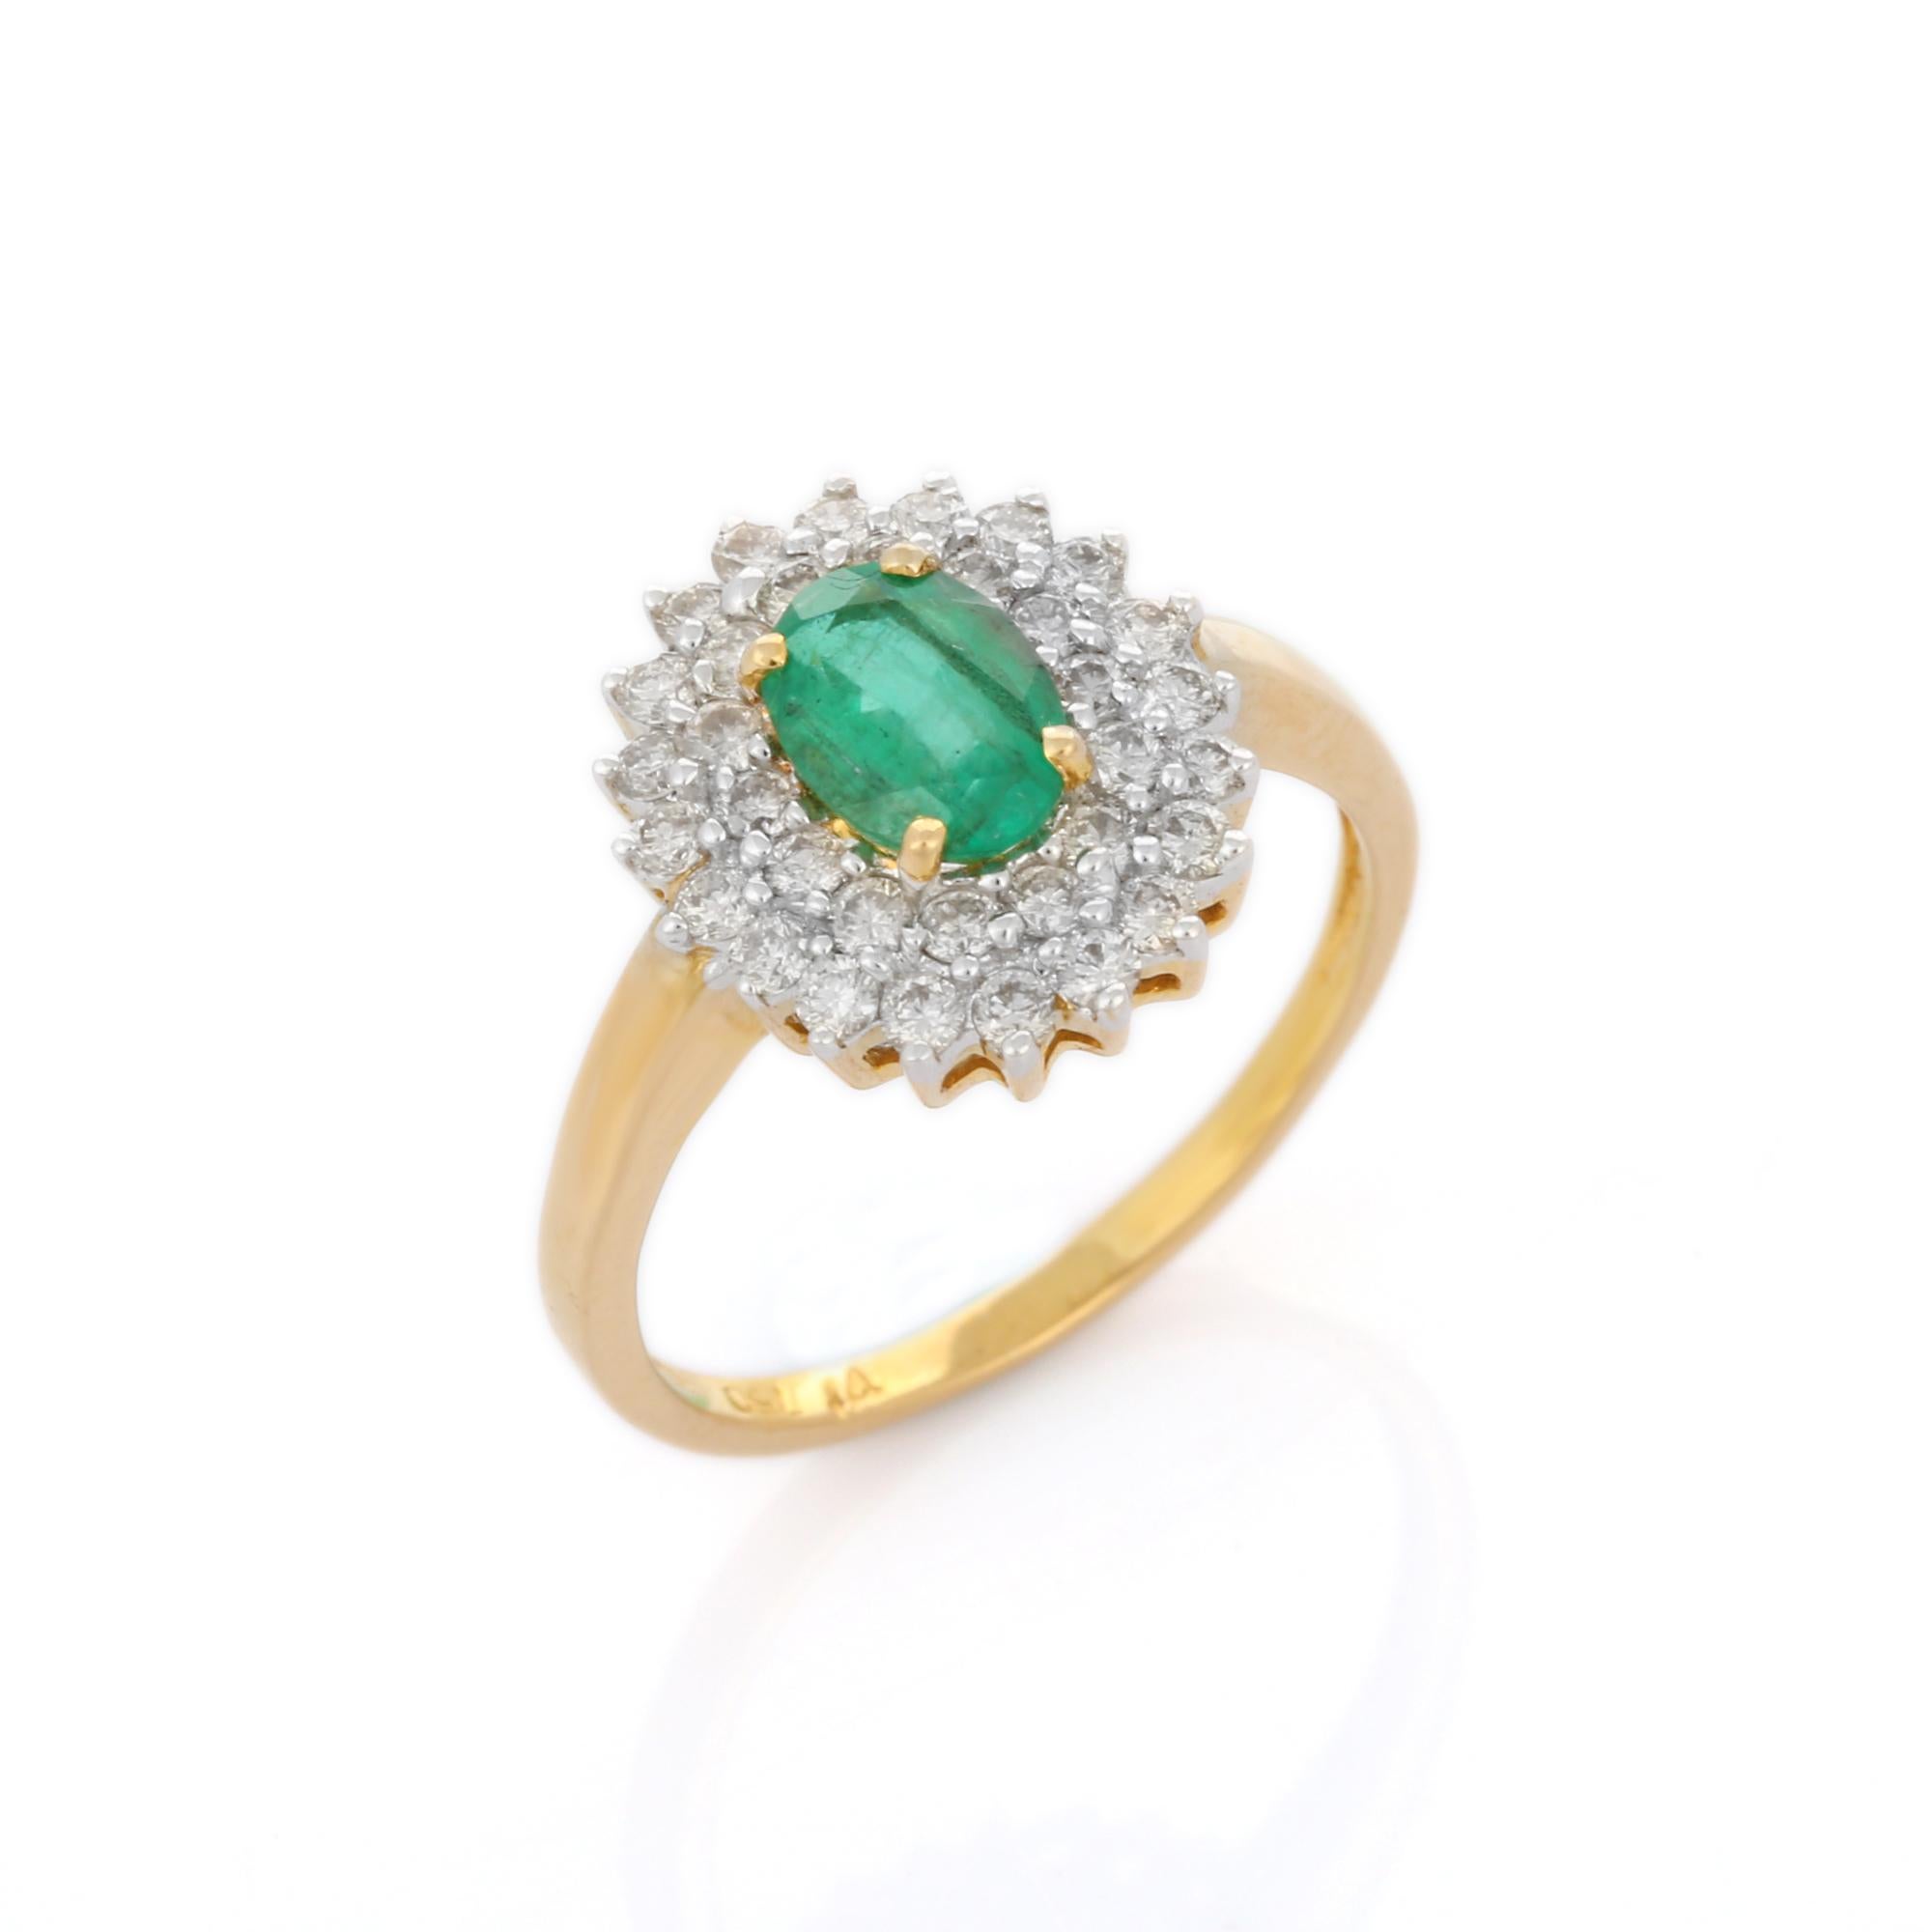 For Sale:  Exquisite 18K Yellow Gold Emerald Halo Diamond Engagement Wedding Ring for Her 2